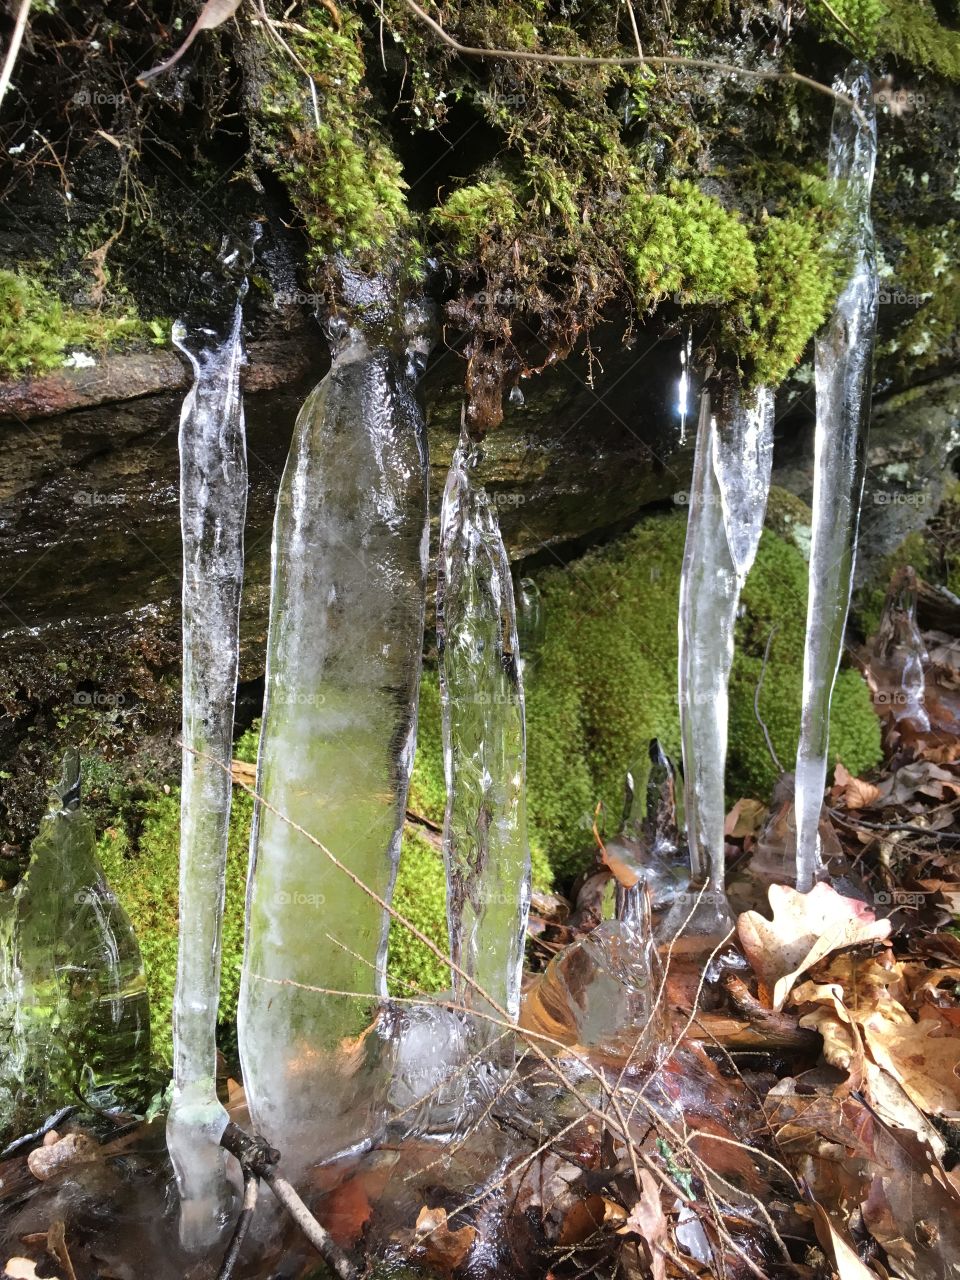 In the winter woods of Connecticut, icicles hanging off of a mossy tree and stone melt in the sun.